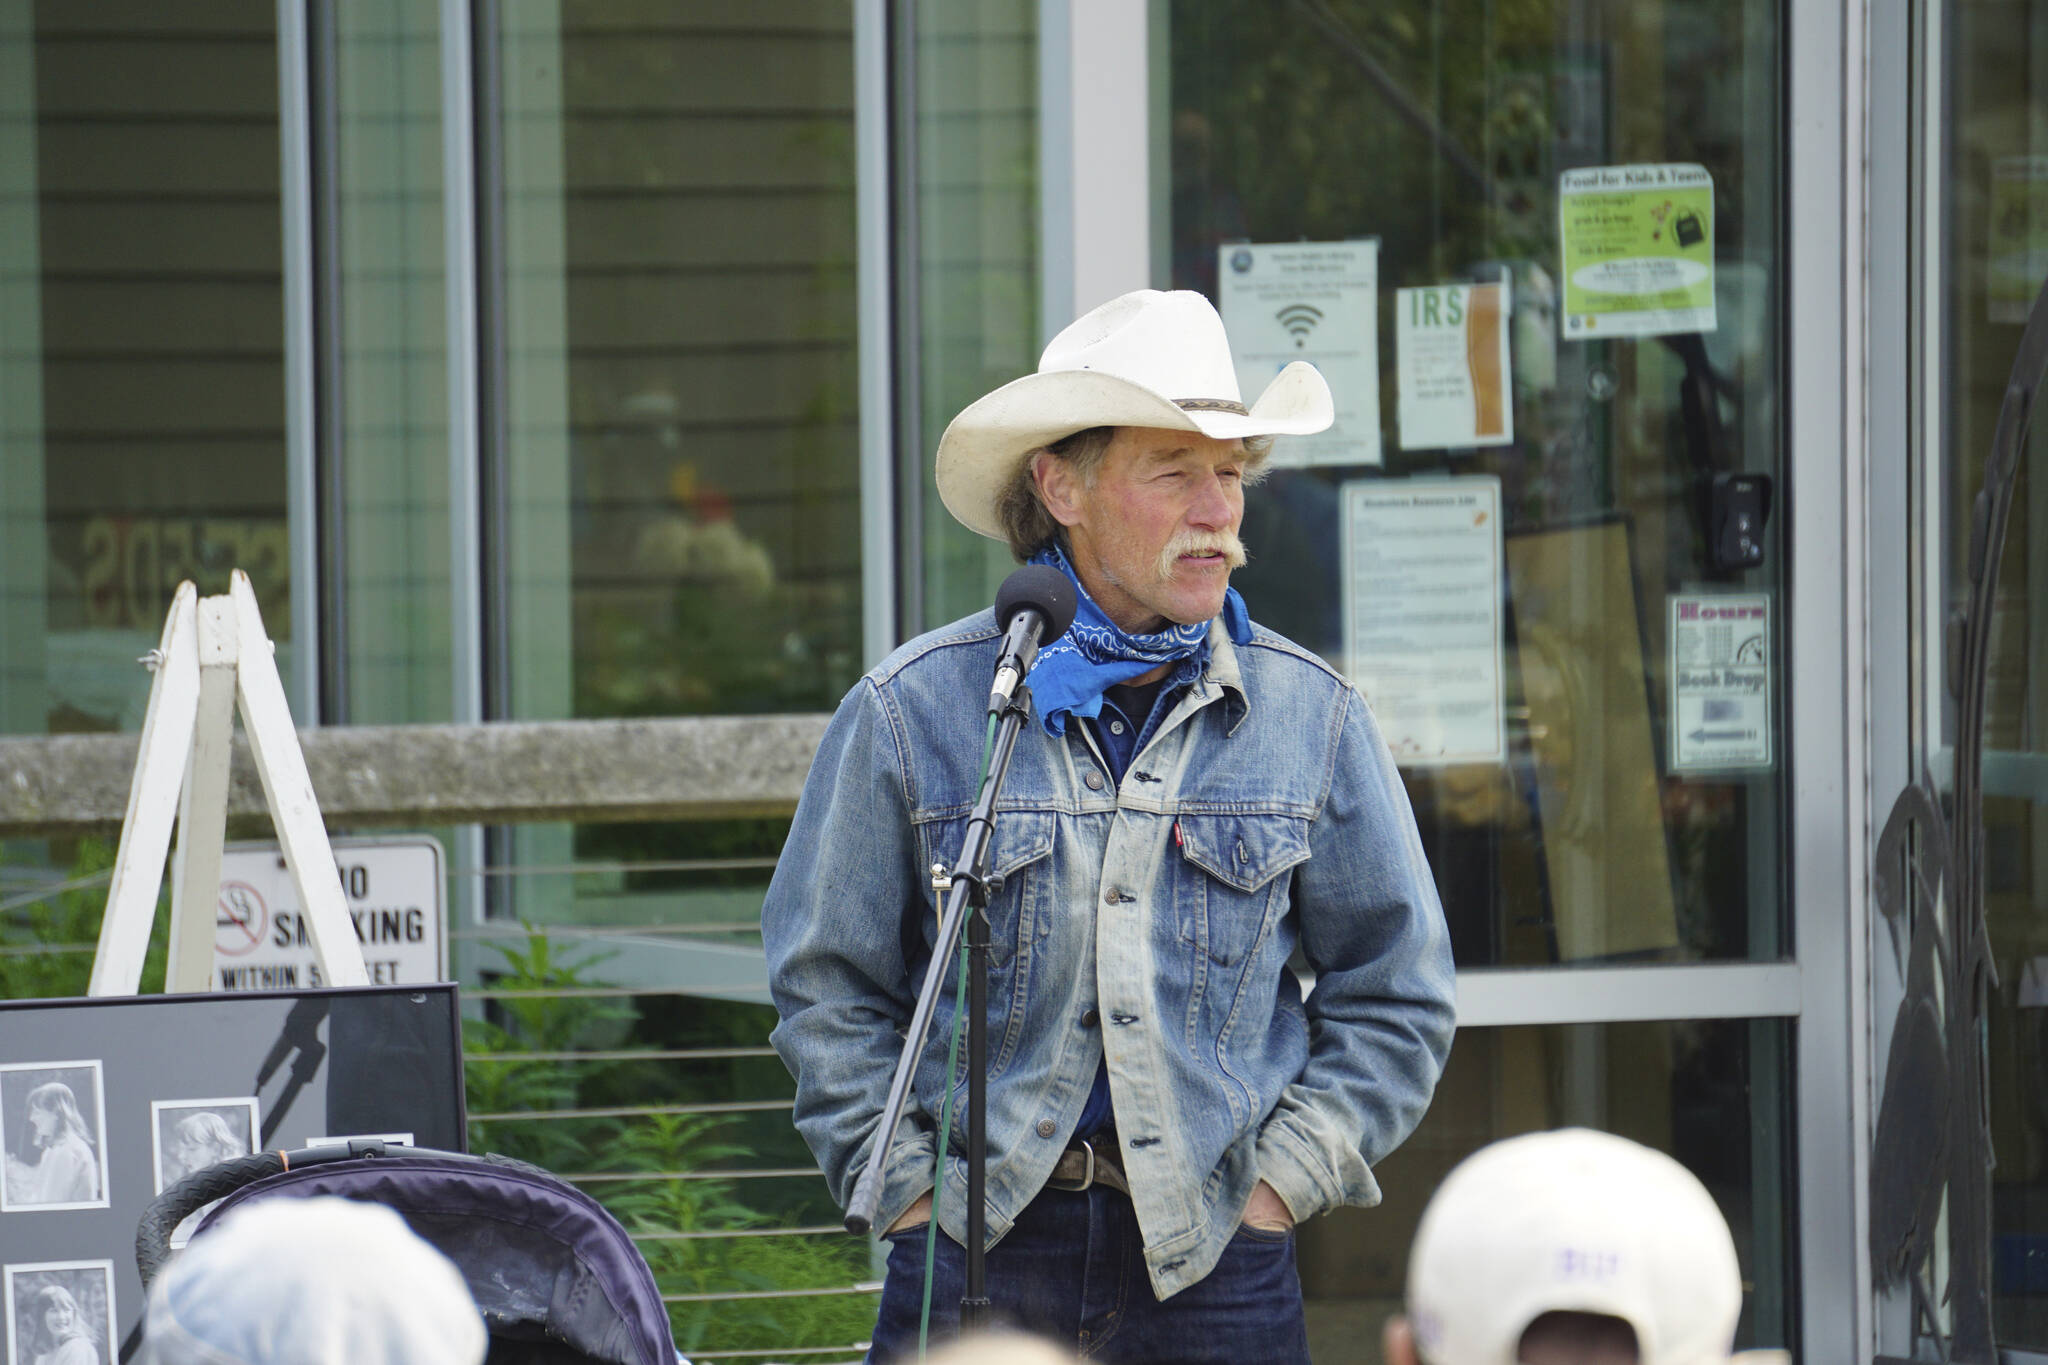 Mark Marette, a friend of Anesha “Duffy” Murnane, speaks at a memorial for Murnane and the dedication of the Loved & Lost Memorial Bench on Sunday, June 12, 2022, at the Homer Public Library in Homer, Alaska. (Photo by Michael Armstrong/Homer News)